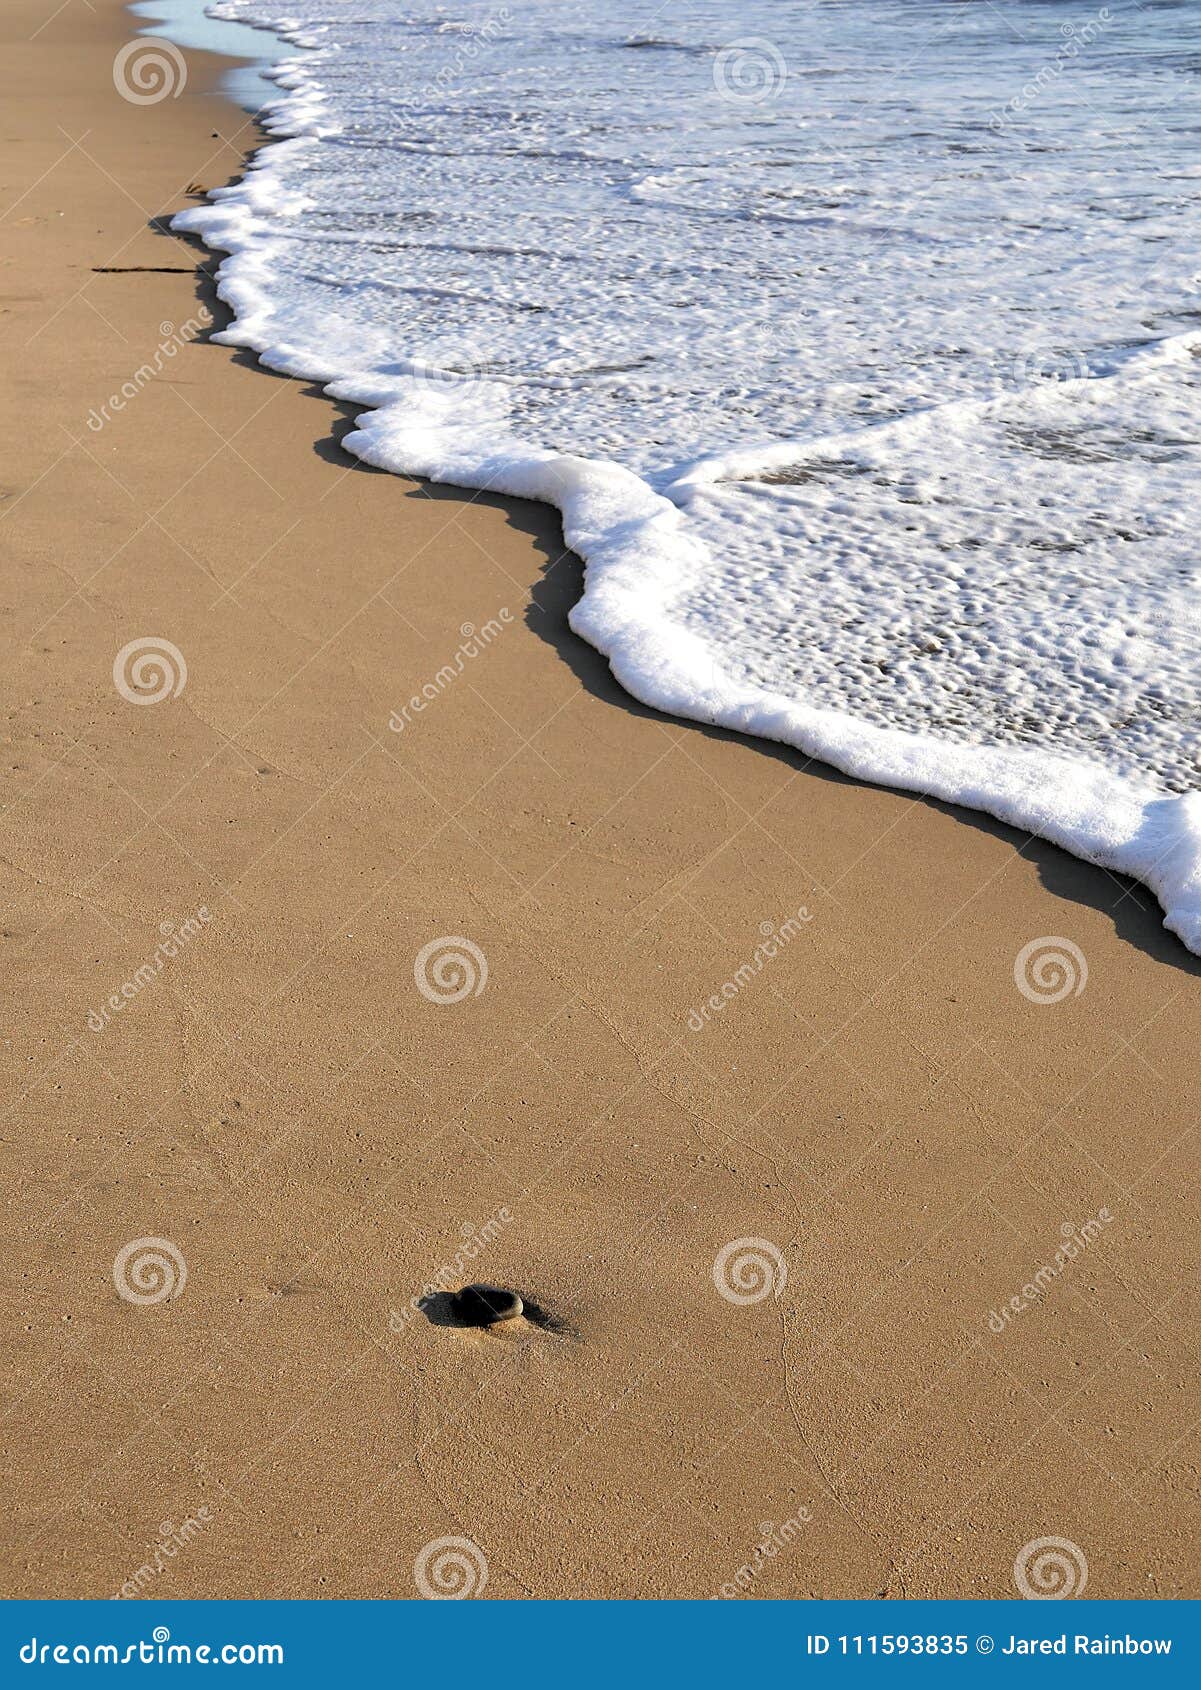 waves lapping against sand on the california coast. sea foam and sandy beaches in summer sunlight for travel blogs, website banner